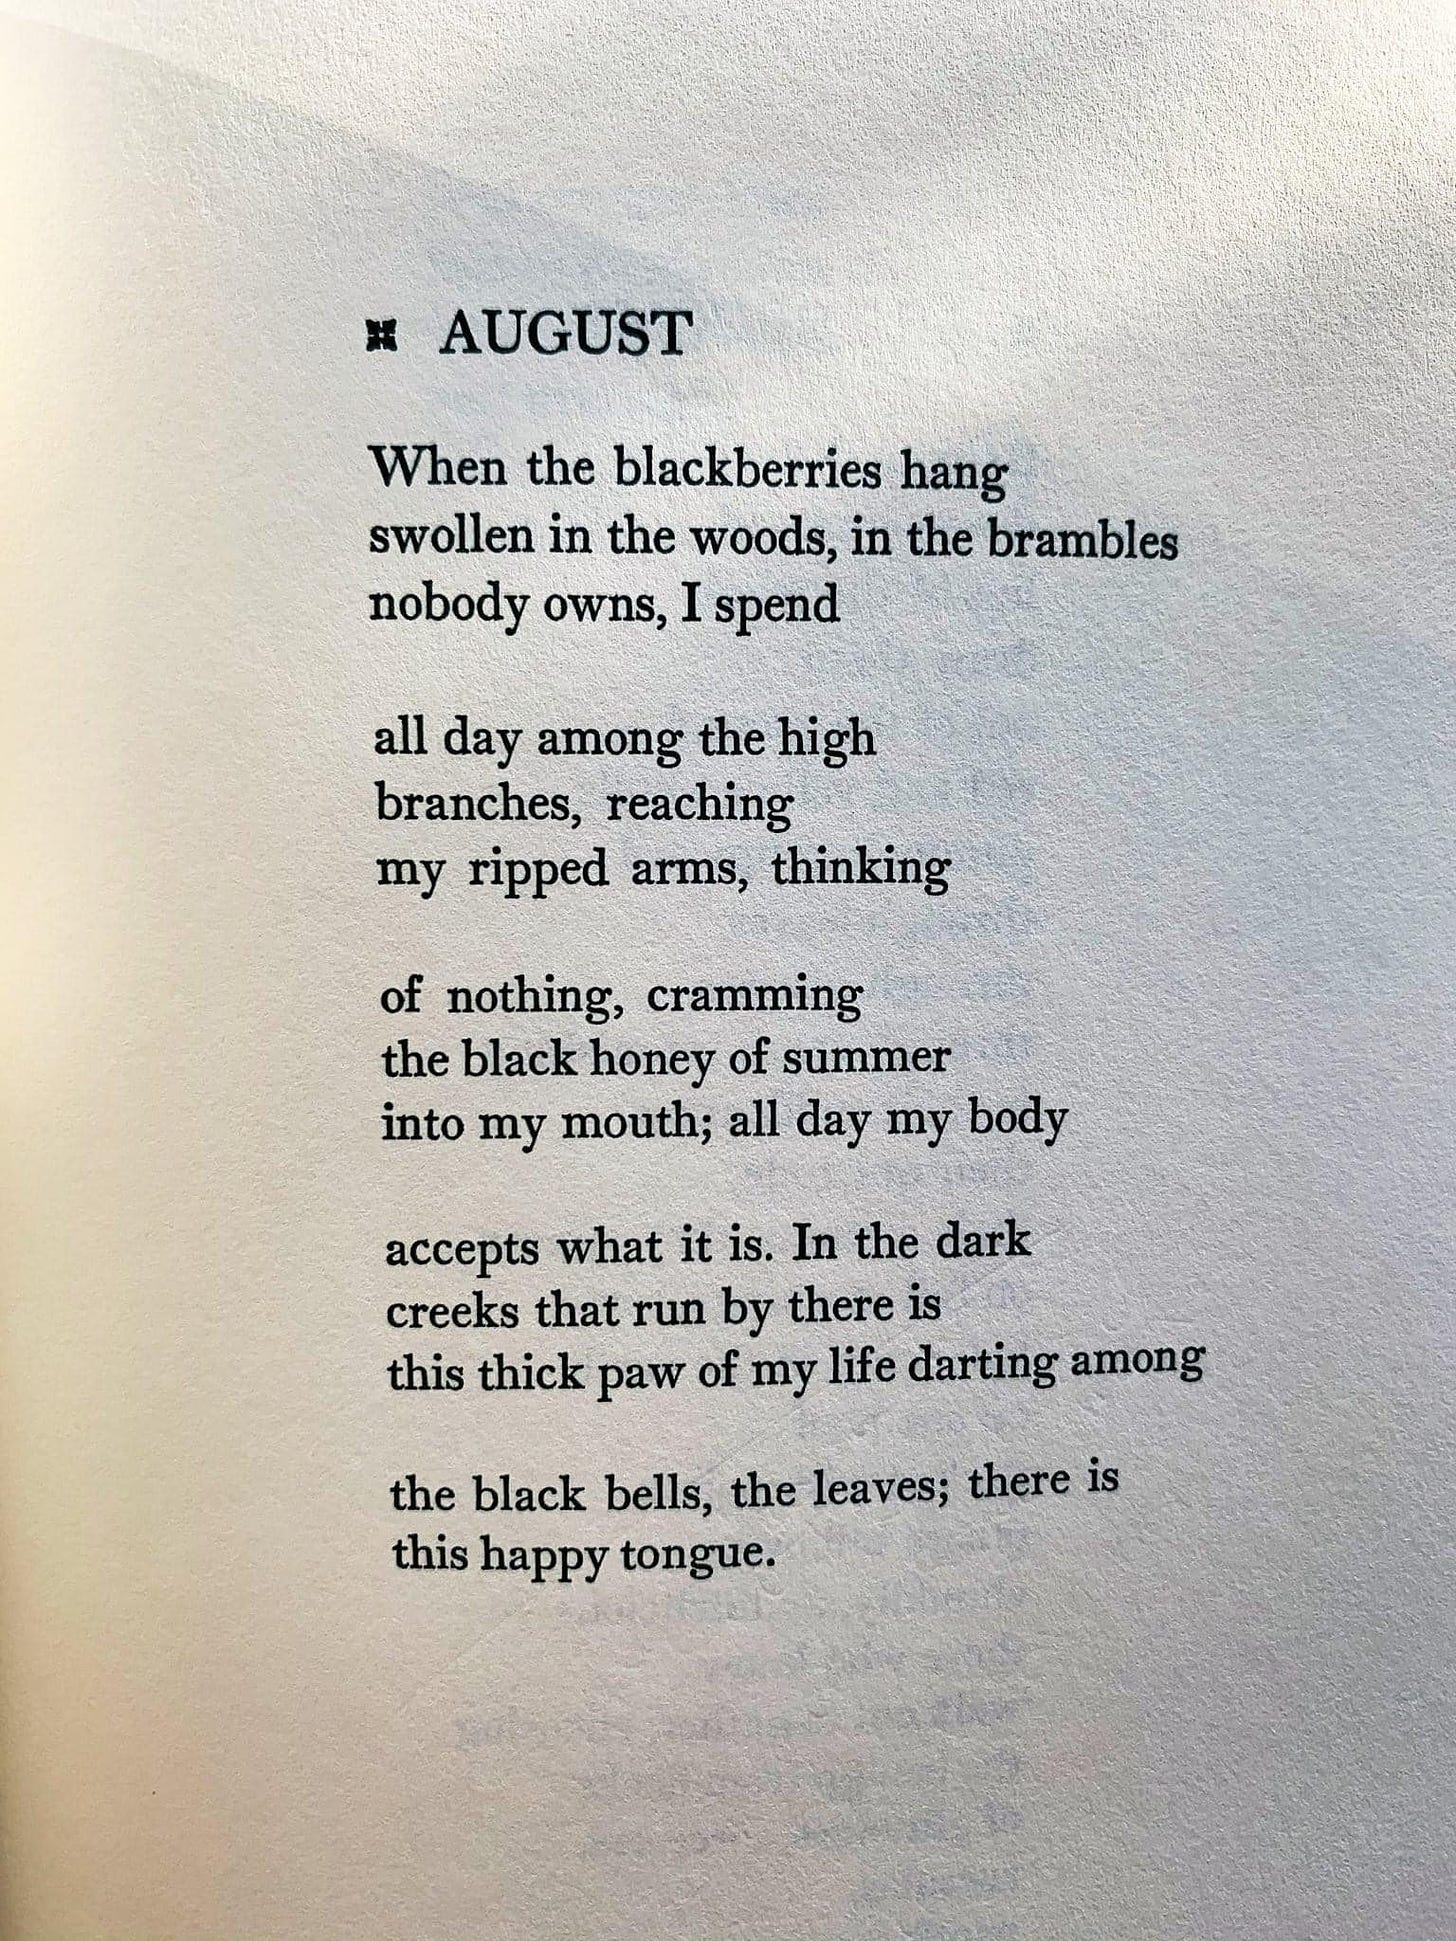 Center for Earth Ethics ar Twitter: "August: Mary Oliver #poetrymatters  #remembertheearth https://t.co/oeysRsxRRL" / Twitter